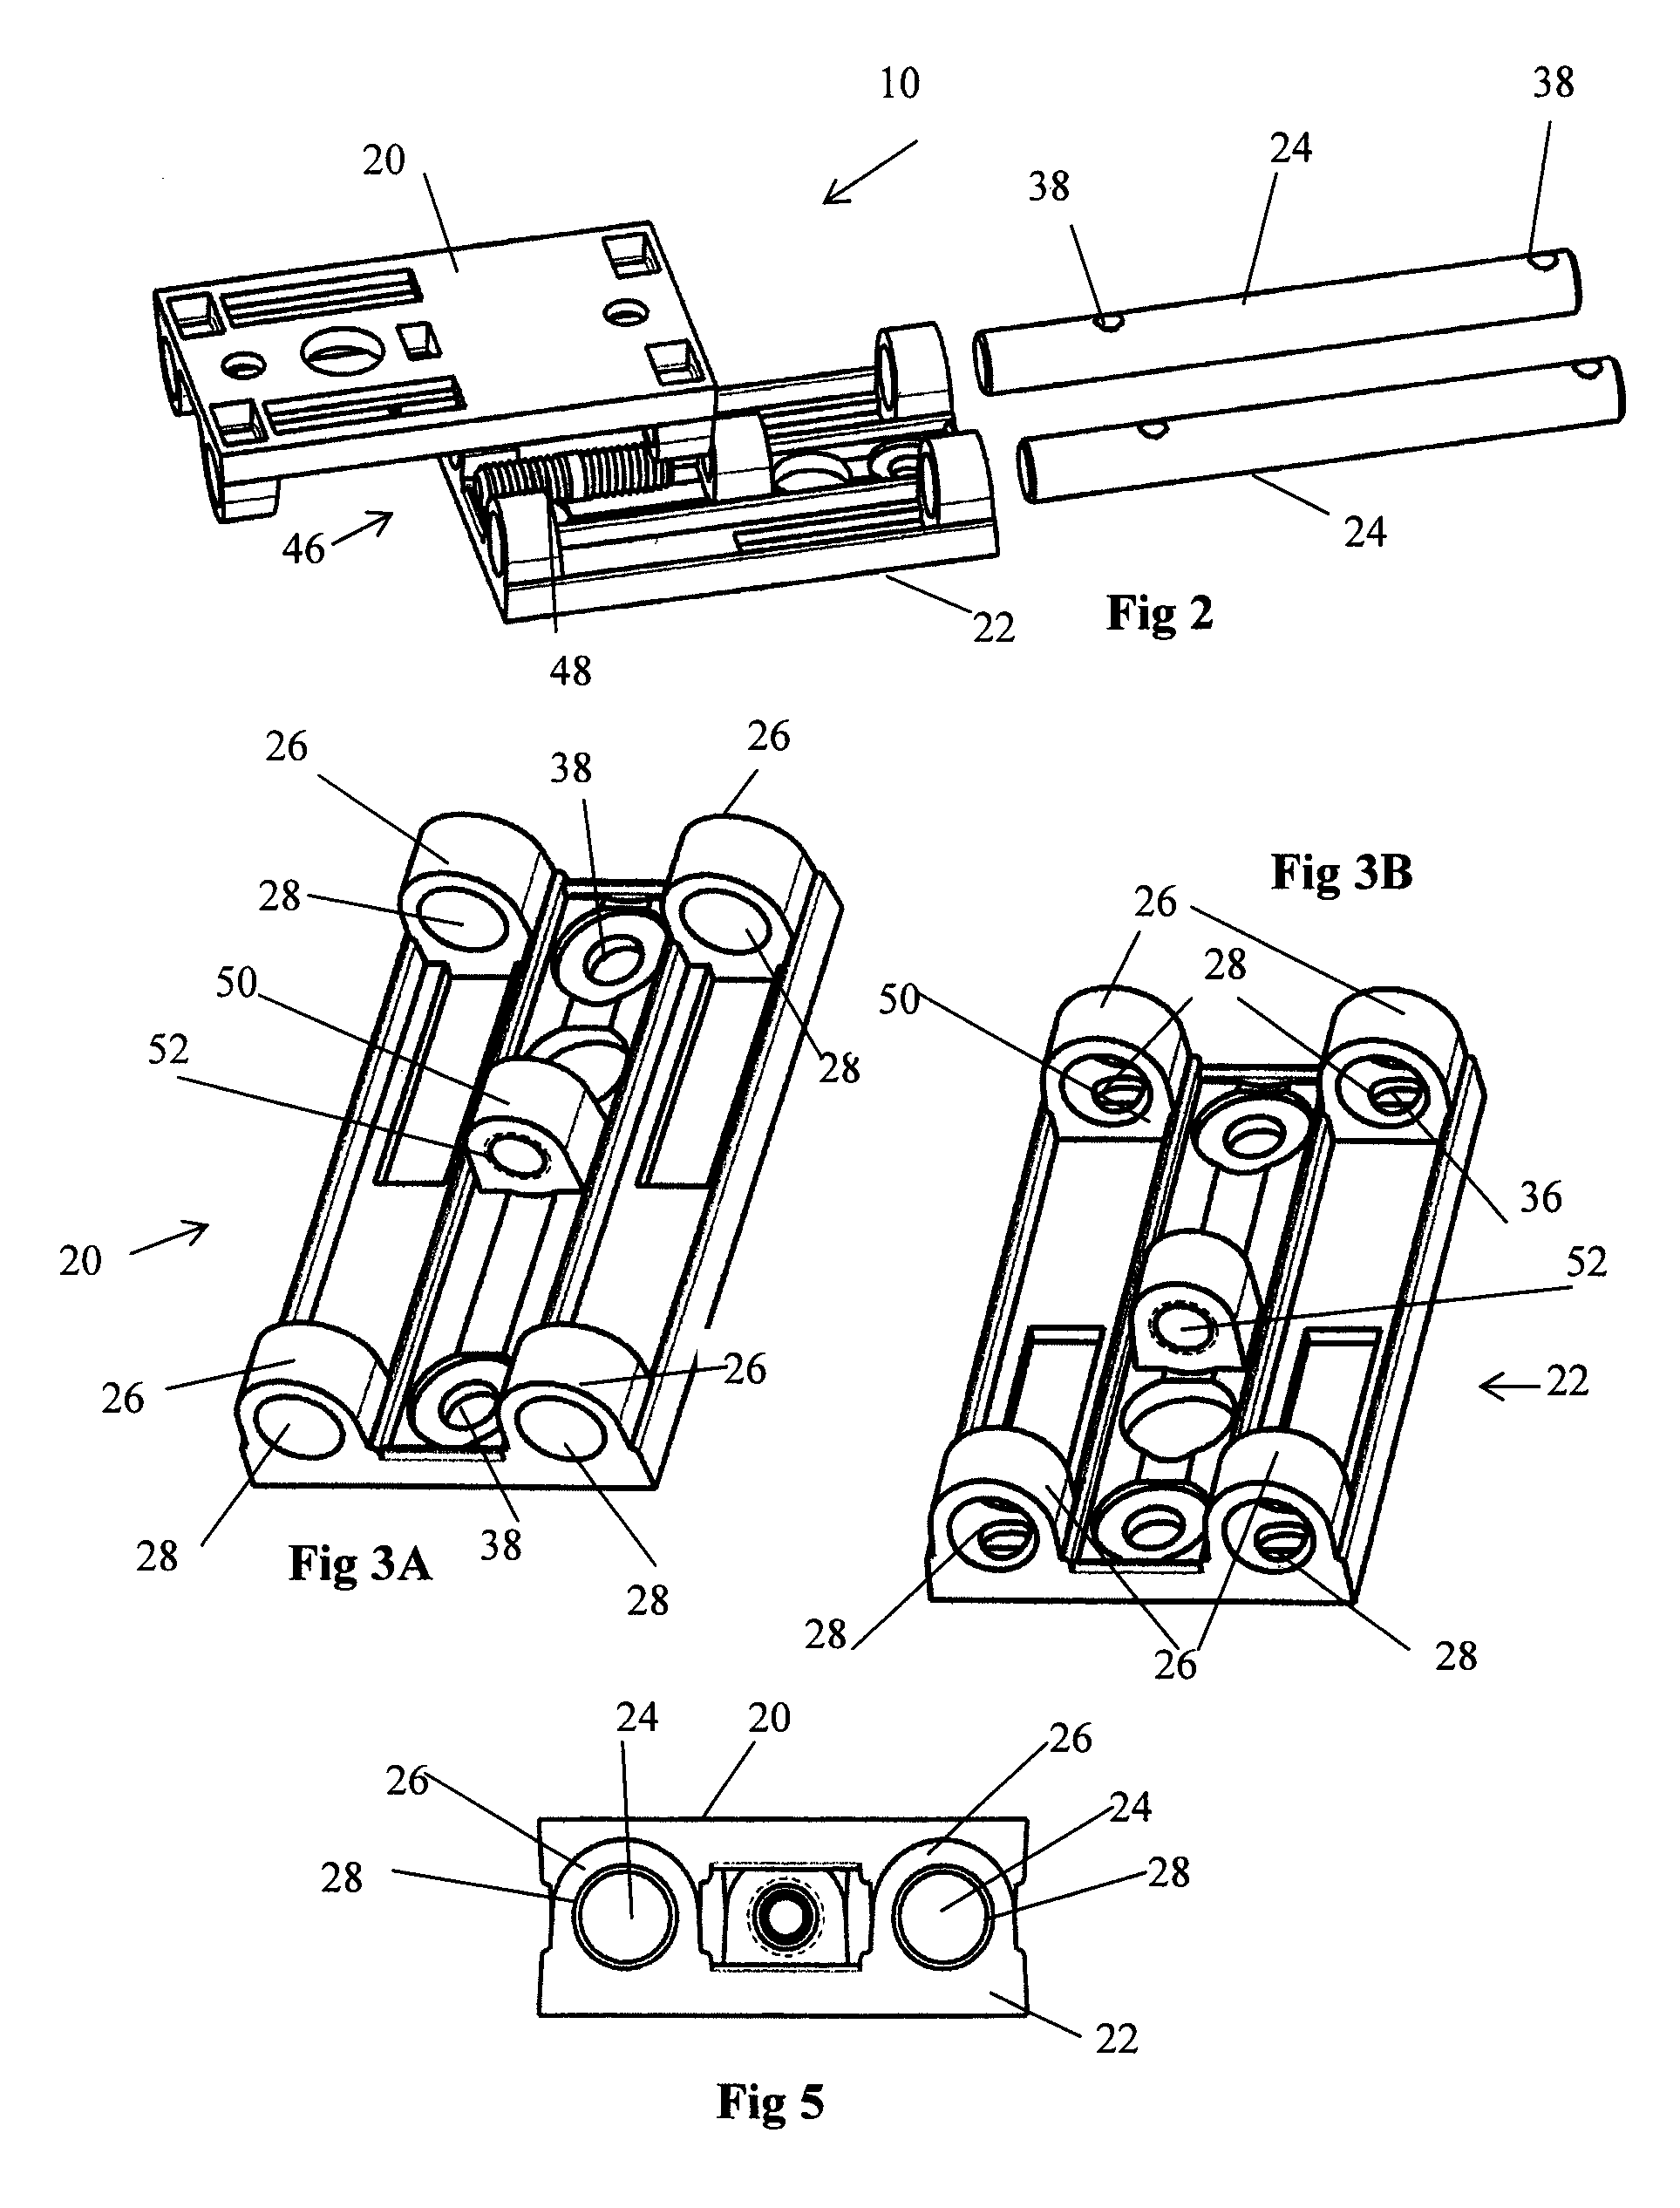 Adjustable neck mounting assembly for a stringed instrument